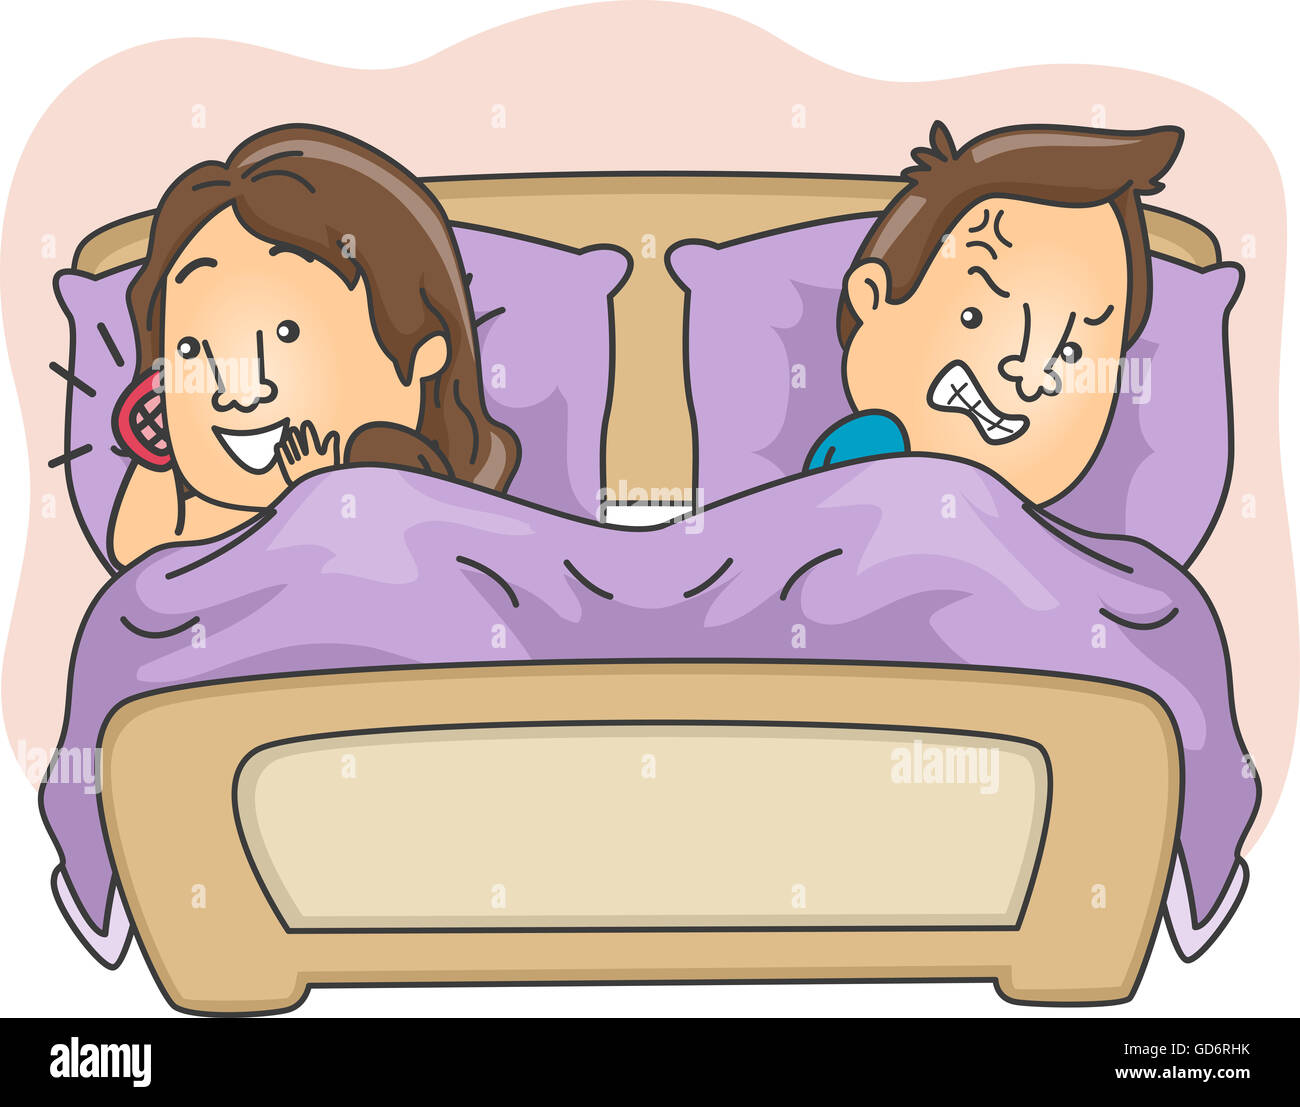 Illustration of an Annoyed Husband Suspecting His Wife of Having an Affair Stock Photo